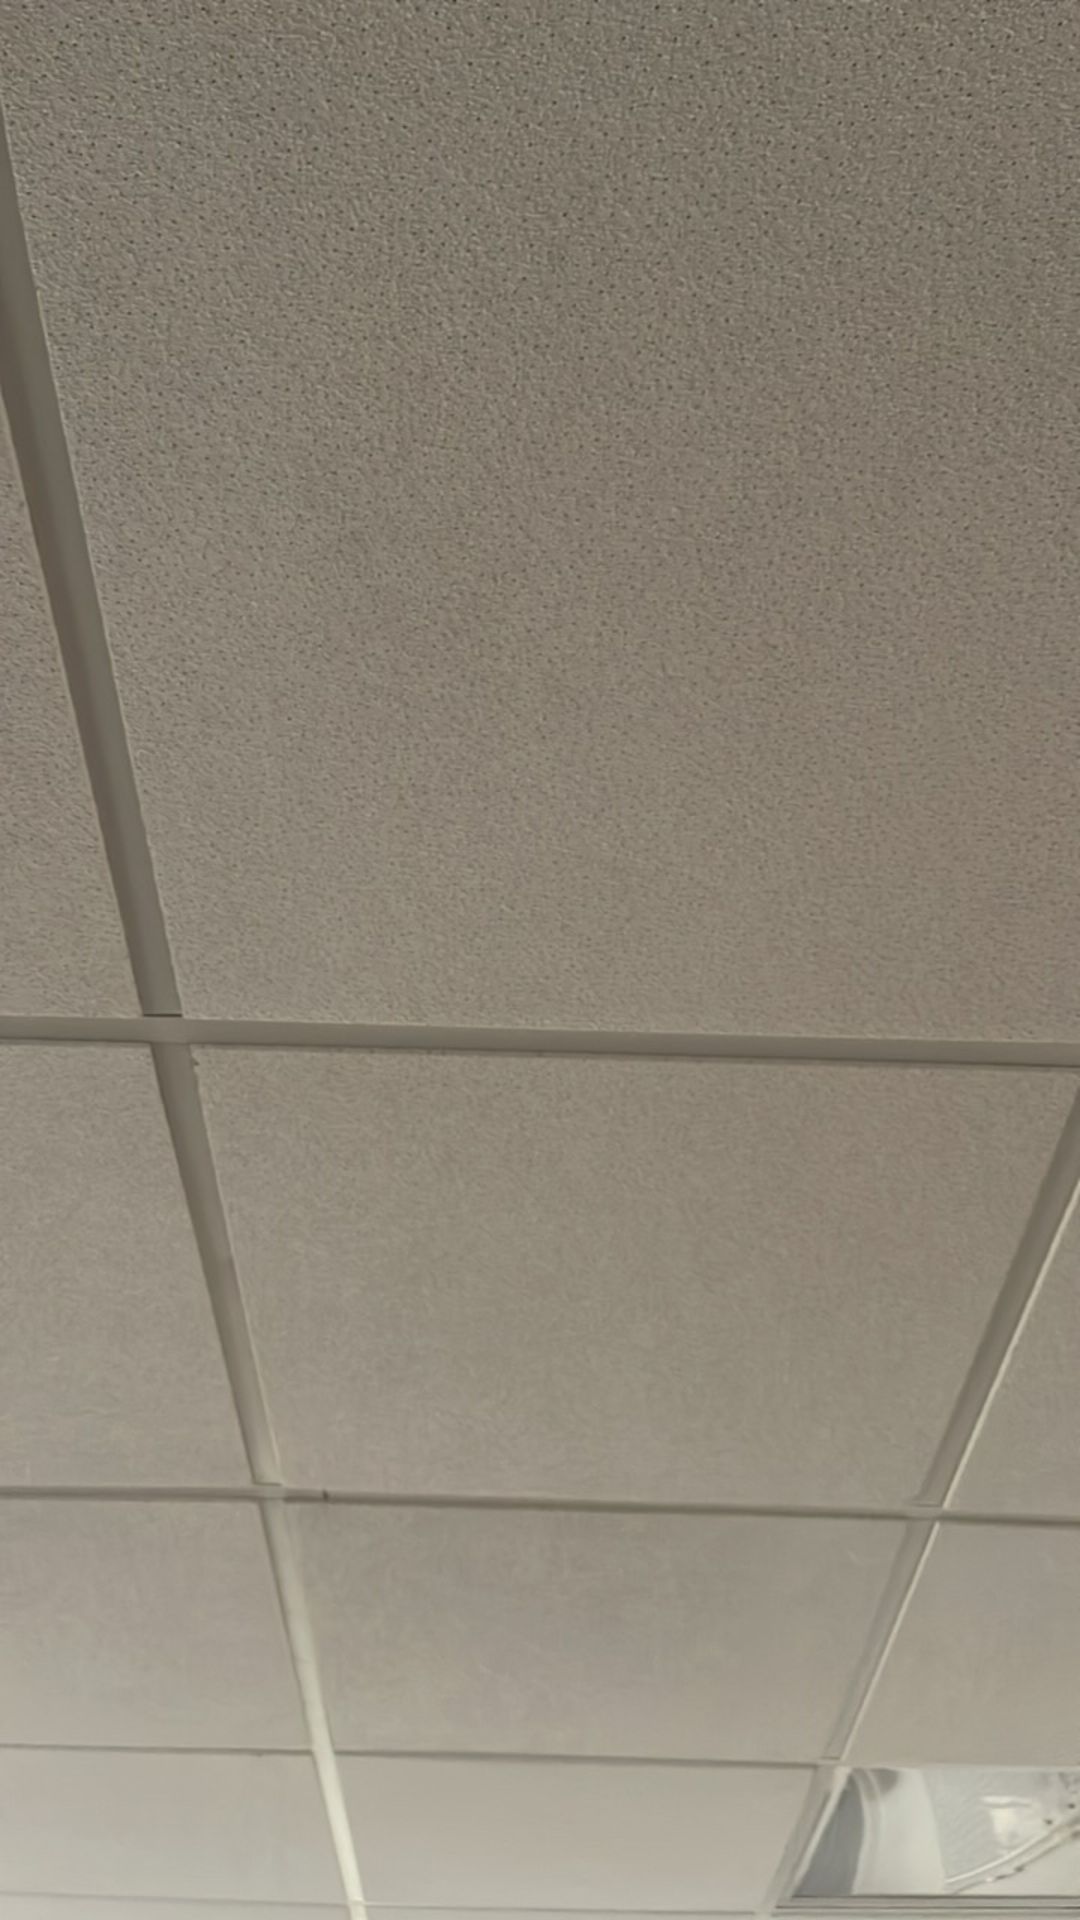 Ceiling Tiles - Image 2 of 5